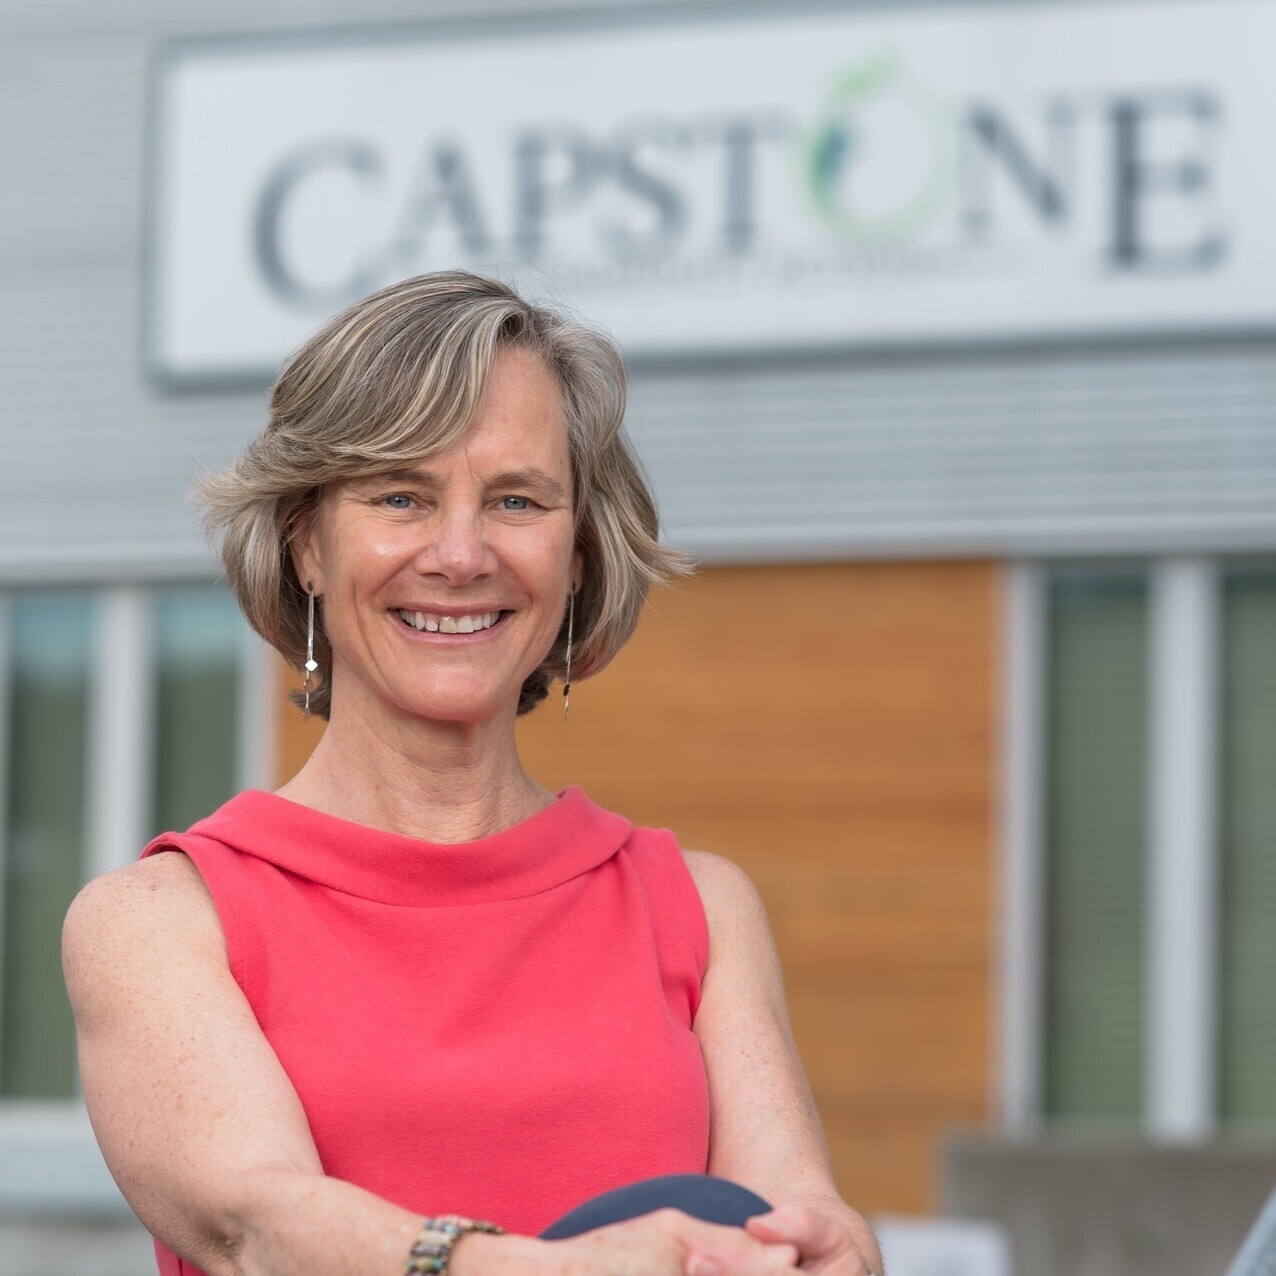 Image of a woman leaning back posed in front of the Capstone sign